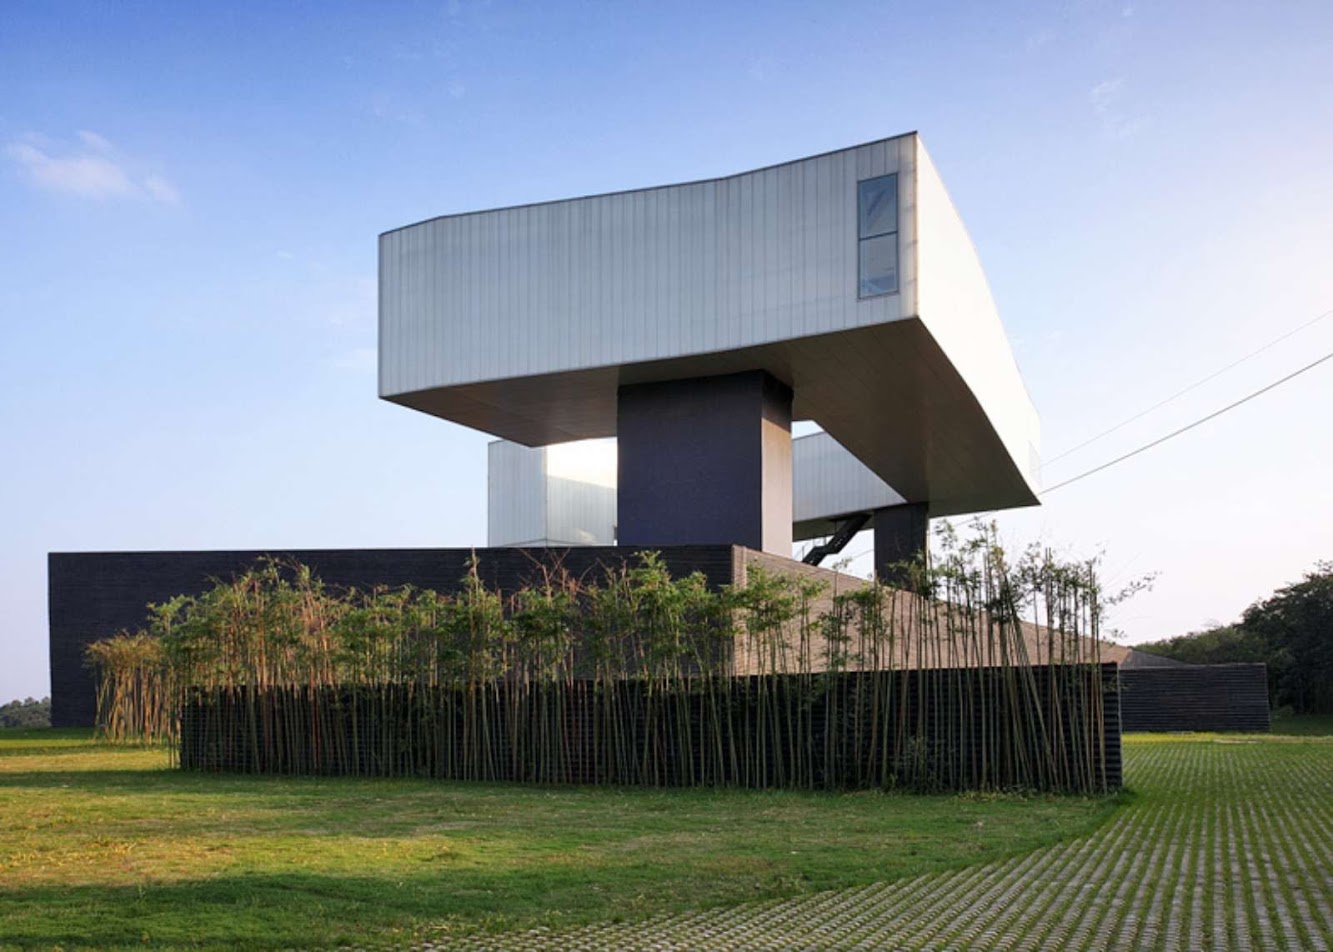 Sifang Art Museum by Steven Holl